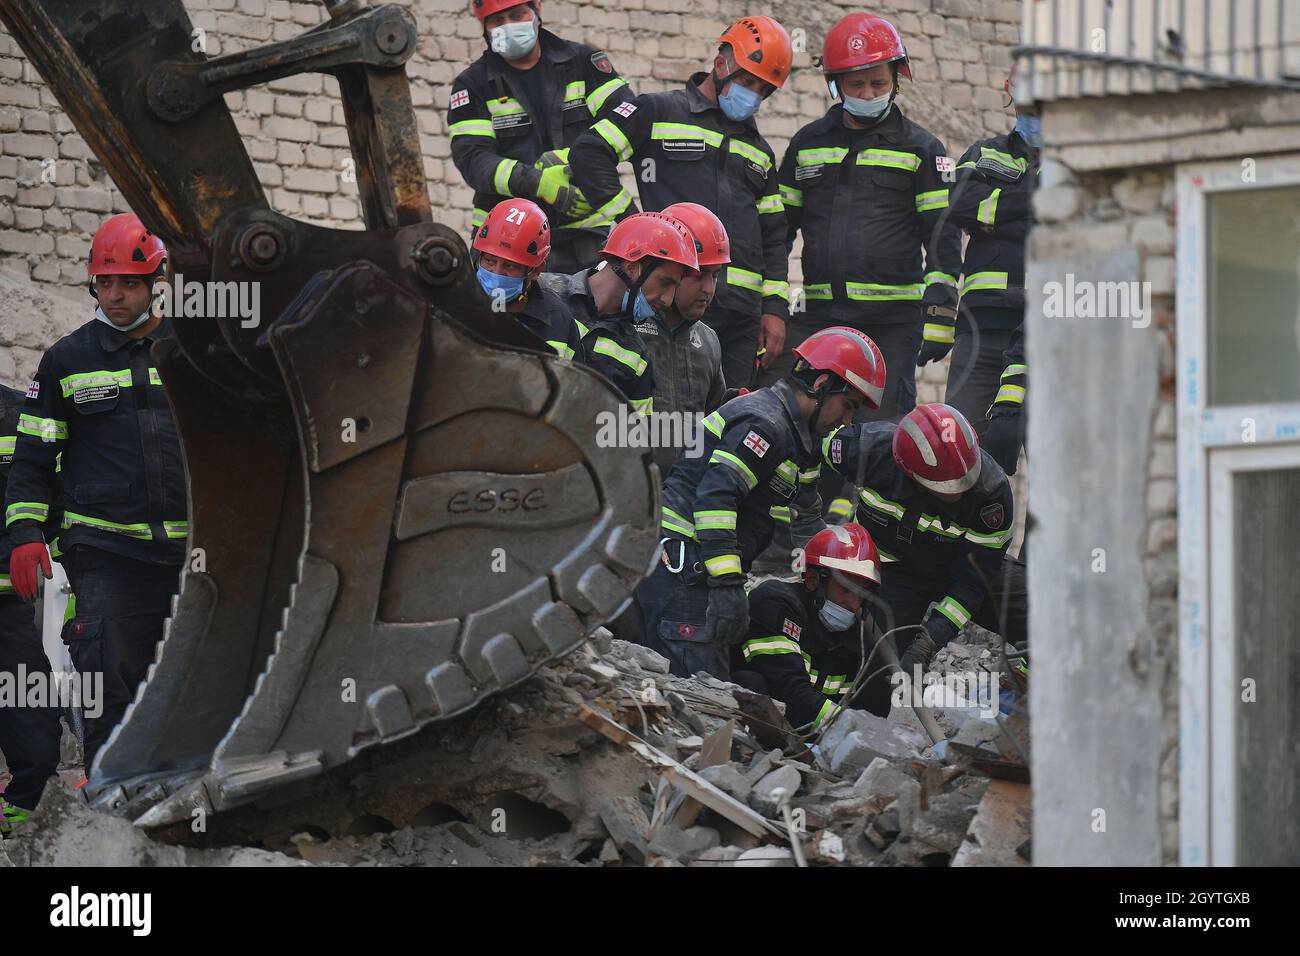 Tbilisi, Georgia. 9th Oct, 2021. Rescuers work on the ruins of a collapsed building in Batumi, Georgia, Oct. 9, 2021. Nine people were killed after a multi-block residential building collapsed in Georgia's Black Sea town of Batumi, the country's interior ministry said on Saturday. The collapse, which happened on Friday, was reportedly caused by violation of construction procedures that had damaged its retaining wall. Credit: Kulumbegashvili Tamuna/Xinhua/Alamy Live News Stock Photo